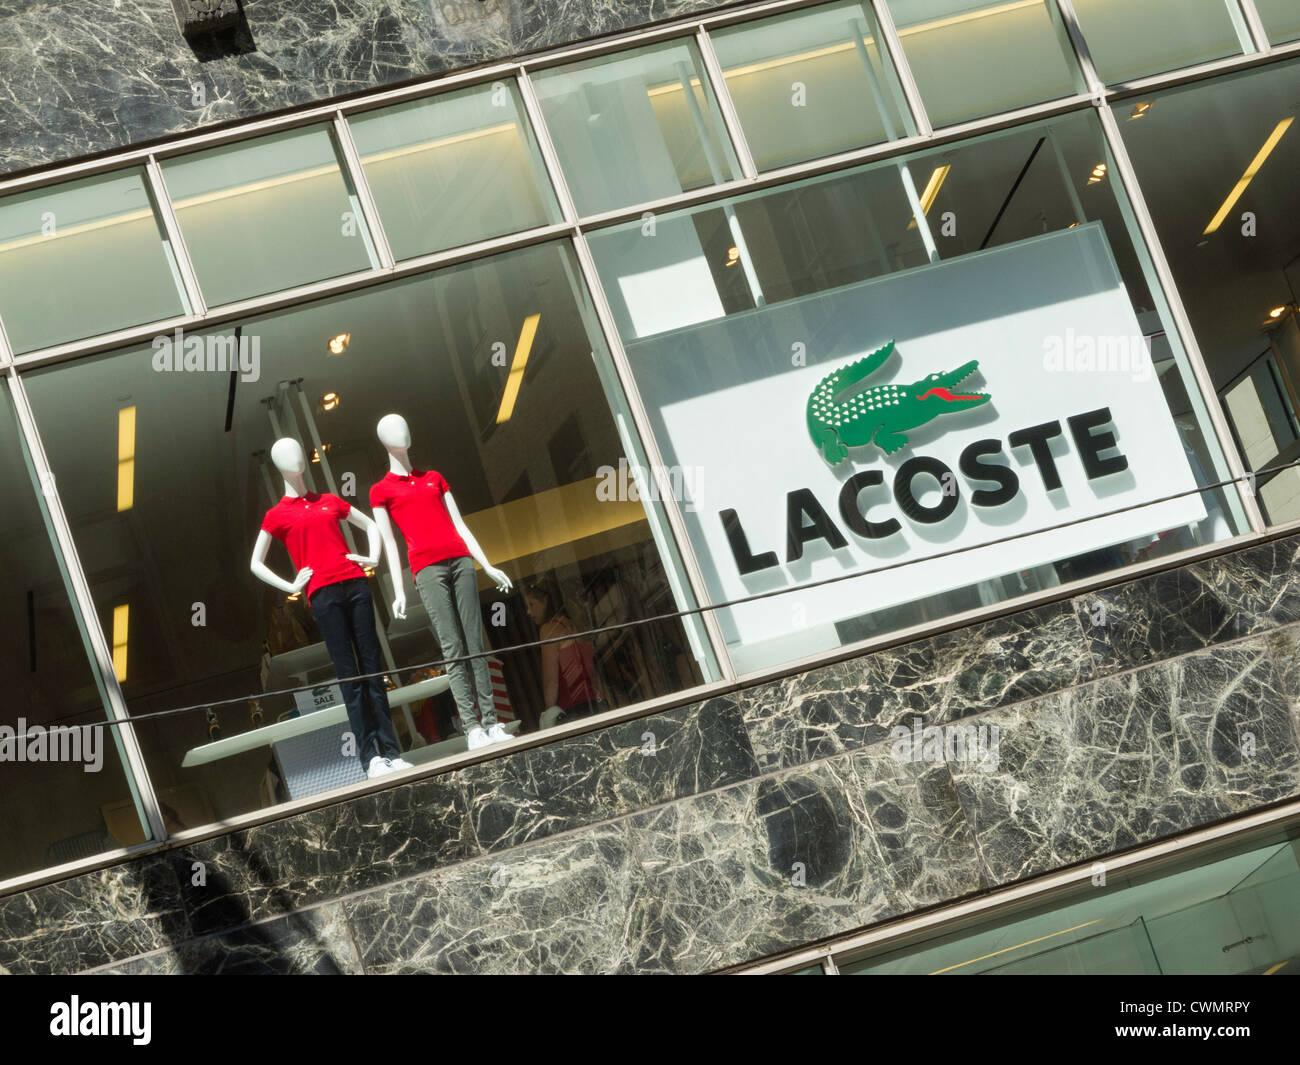 Lacoste Clothing Store, Fifth Avenue, NYC Stock Photo - Alamy